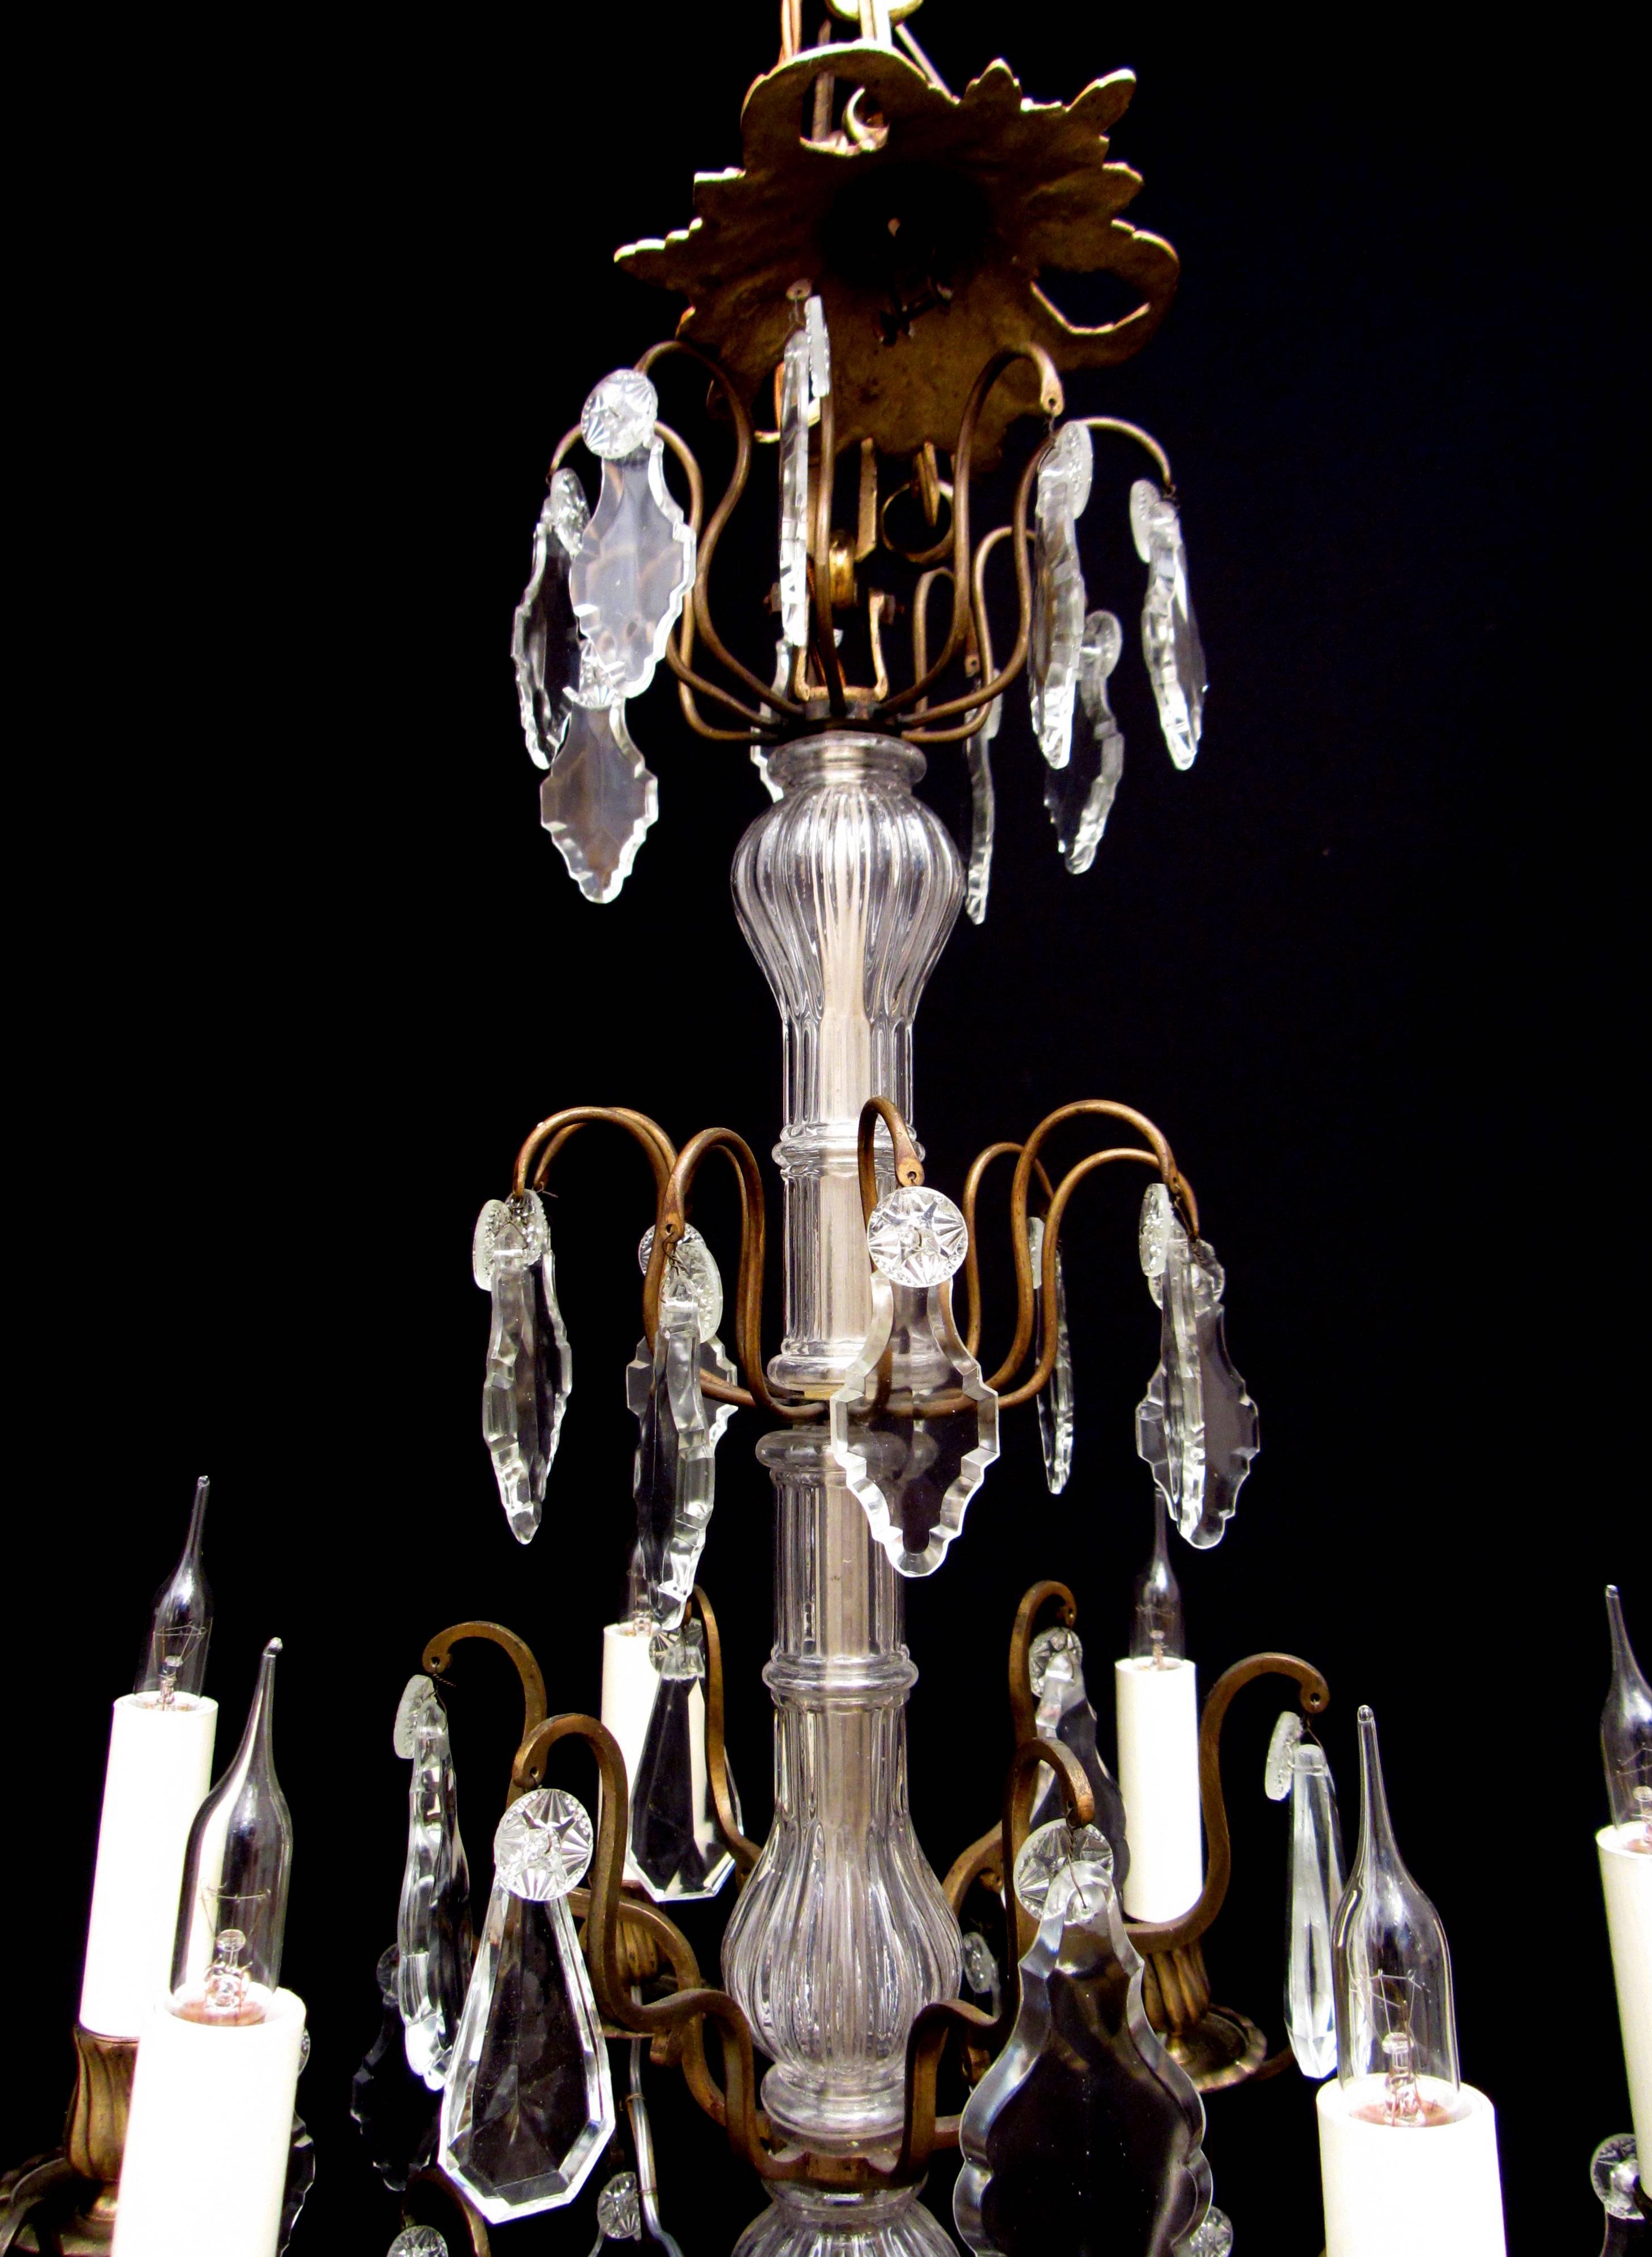 A charming and nice quality French gilt brass and cut-glass chandelier. The cut-glass encased stem supports tiers of hung cut-glass plaques and six arms of light. Terminated by a solid glass ball.